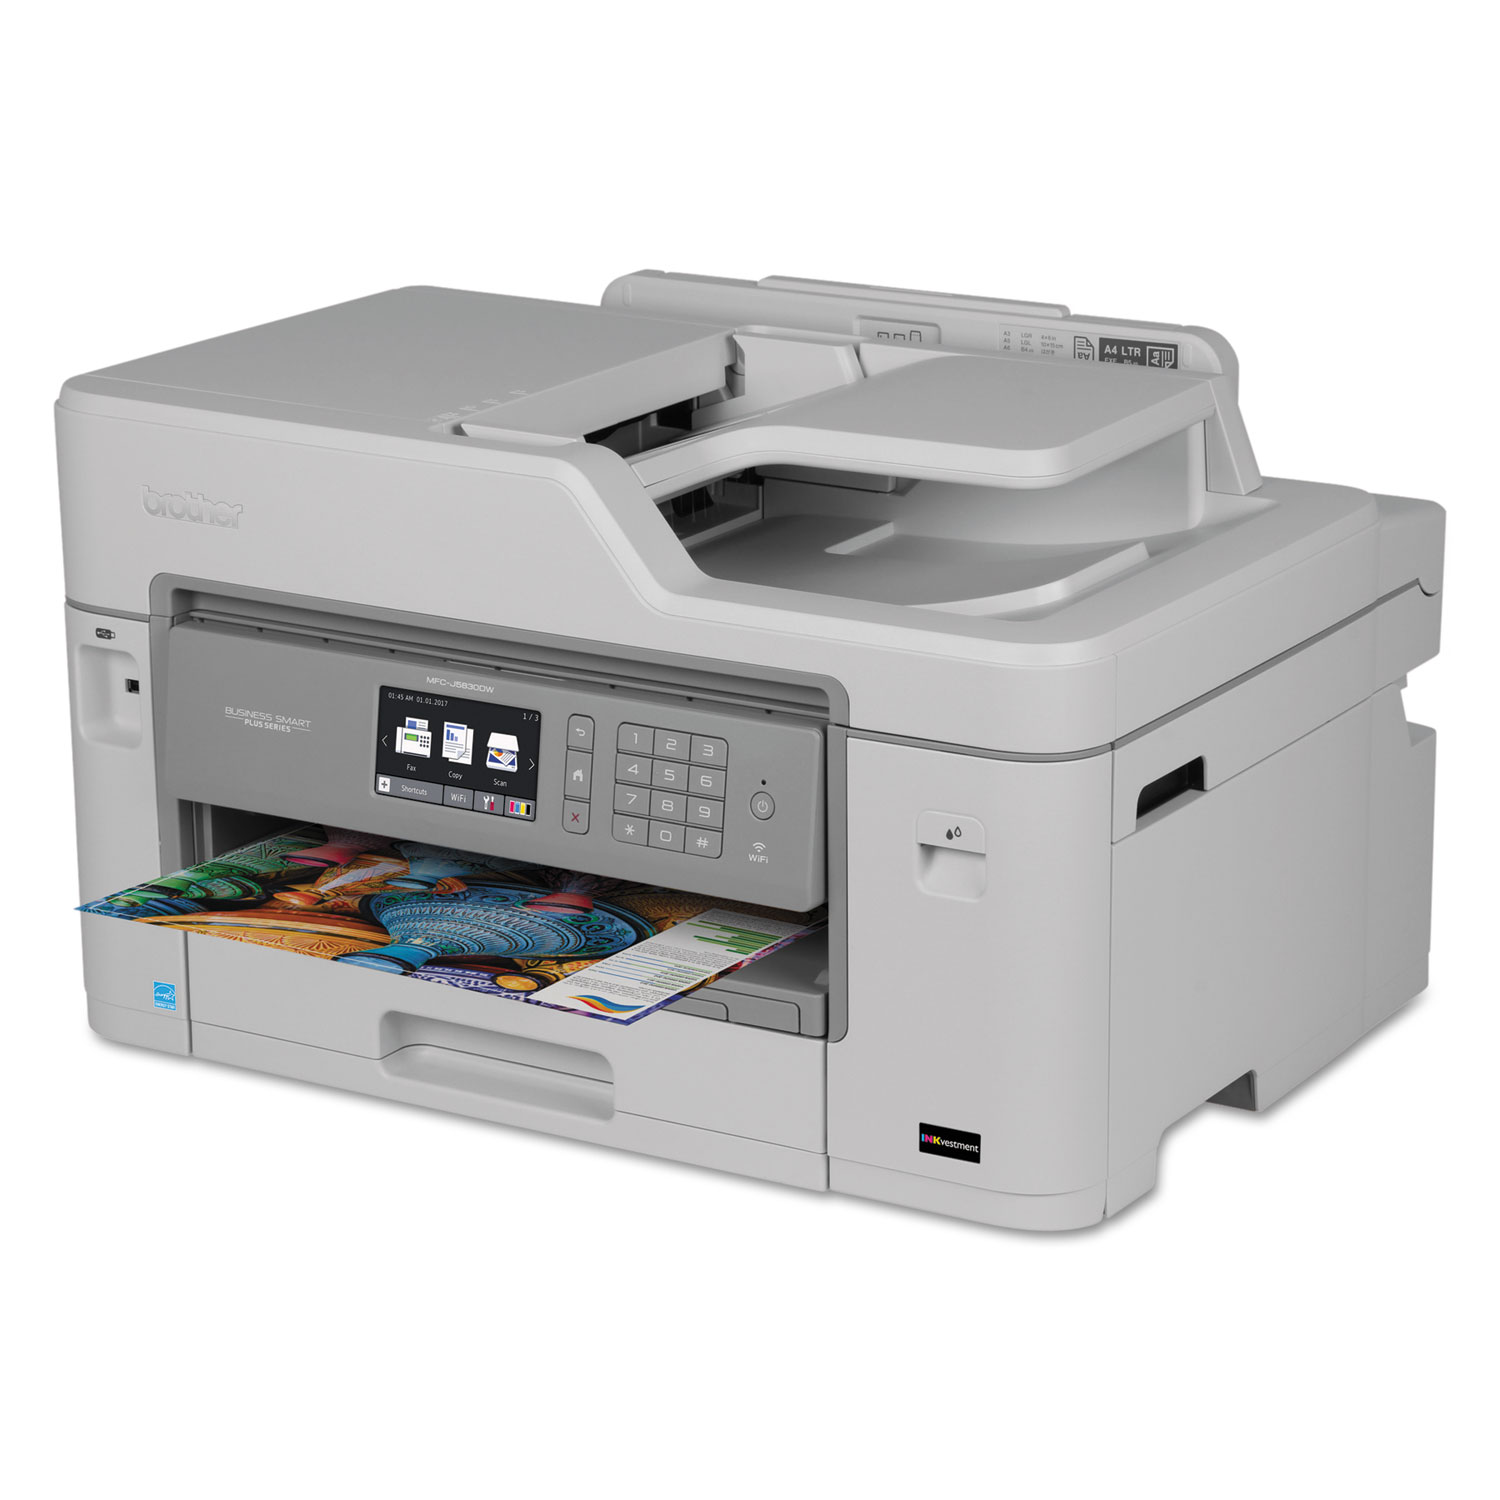 Business Smart Plus MFC-J5830DW Color Inkjet All-in-One Printer Series